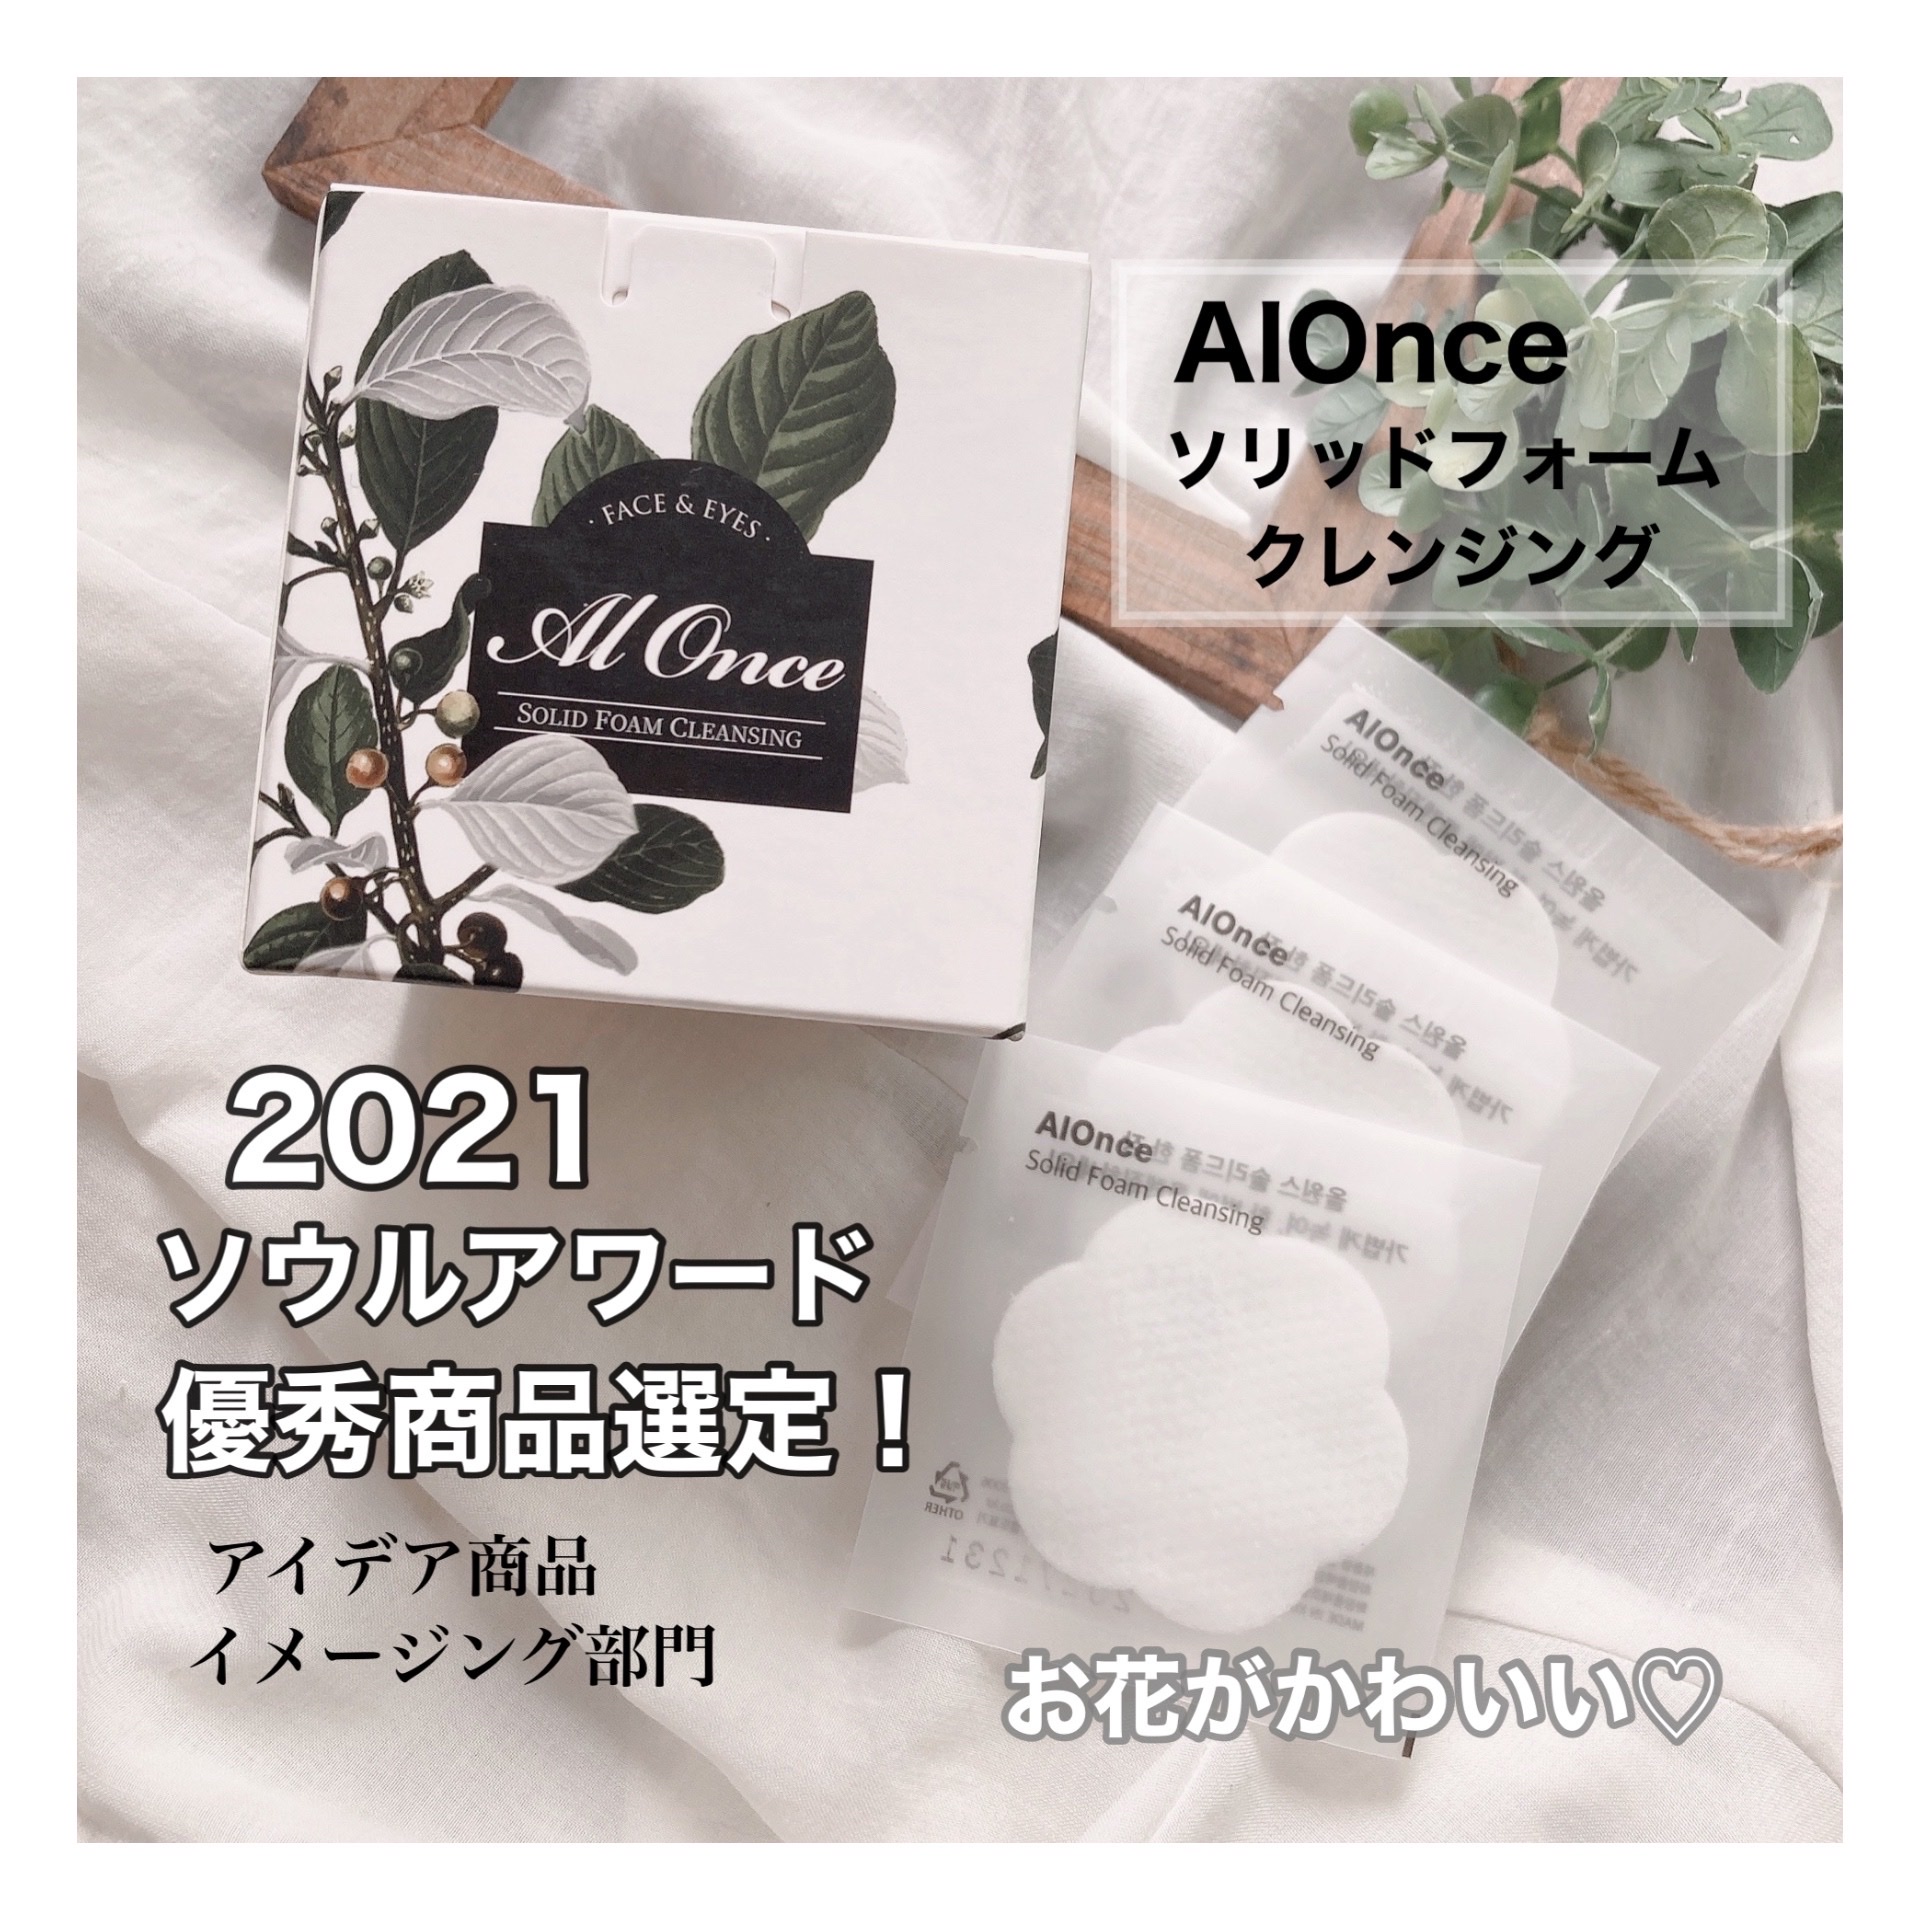 ALONCE / alonce solid foam cleansingの商品情報｜美容・化粧品情報は 